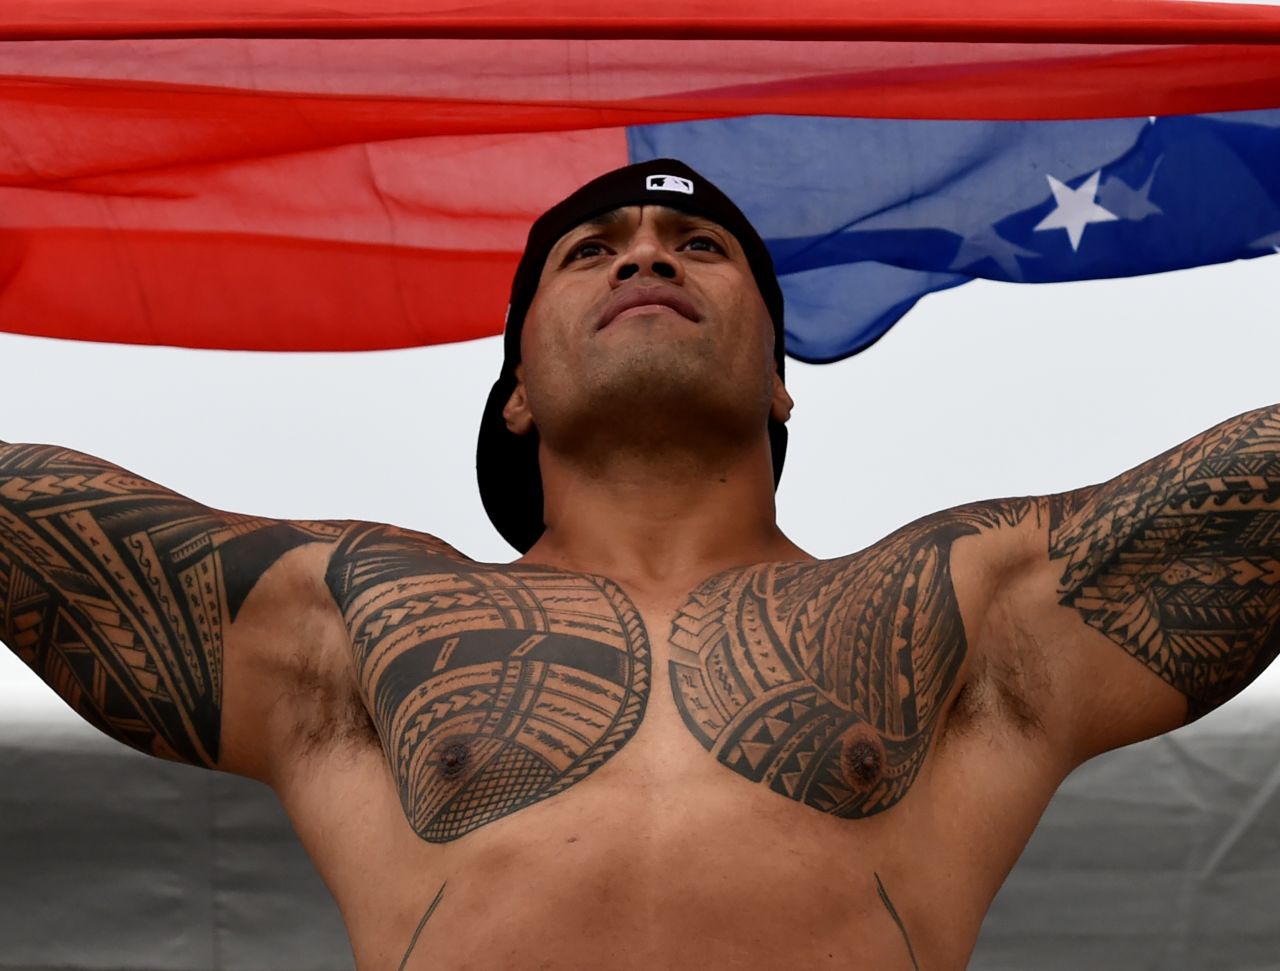 The 2016 tournament was broadcast on NBC and its Sports Network. It reportedly reached national and international audiences in over 400 million homes and 147 countries. Here a Samoan rugby fan supports his team in 2016. 